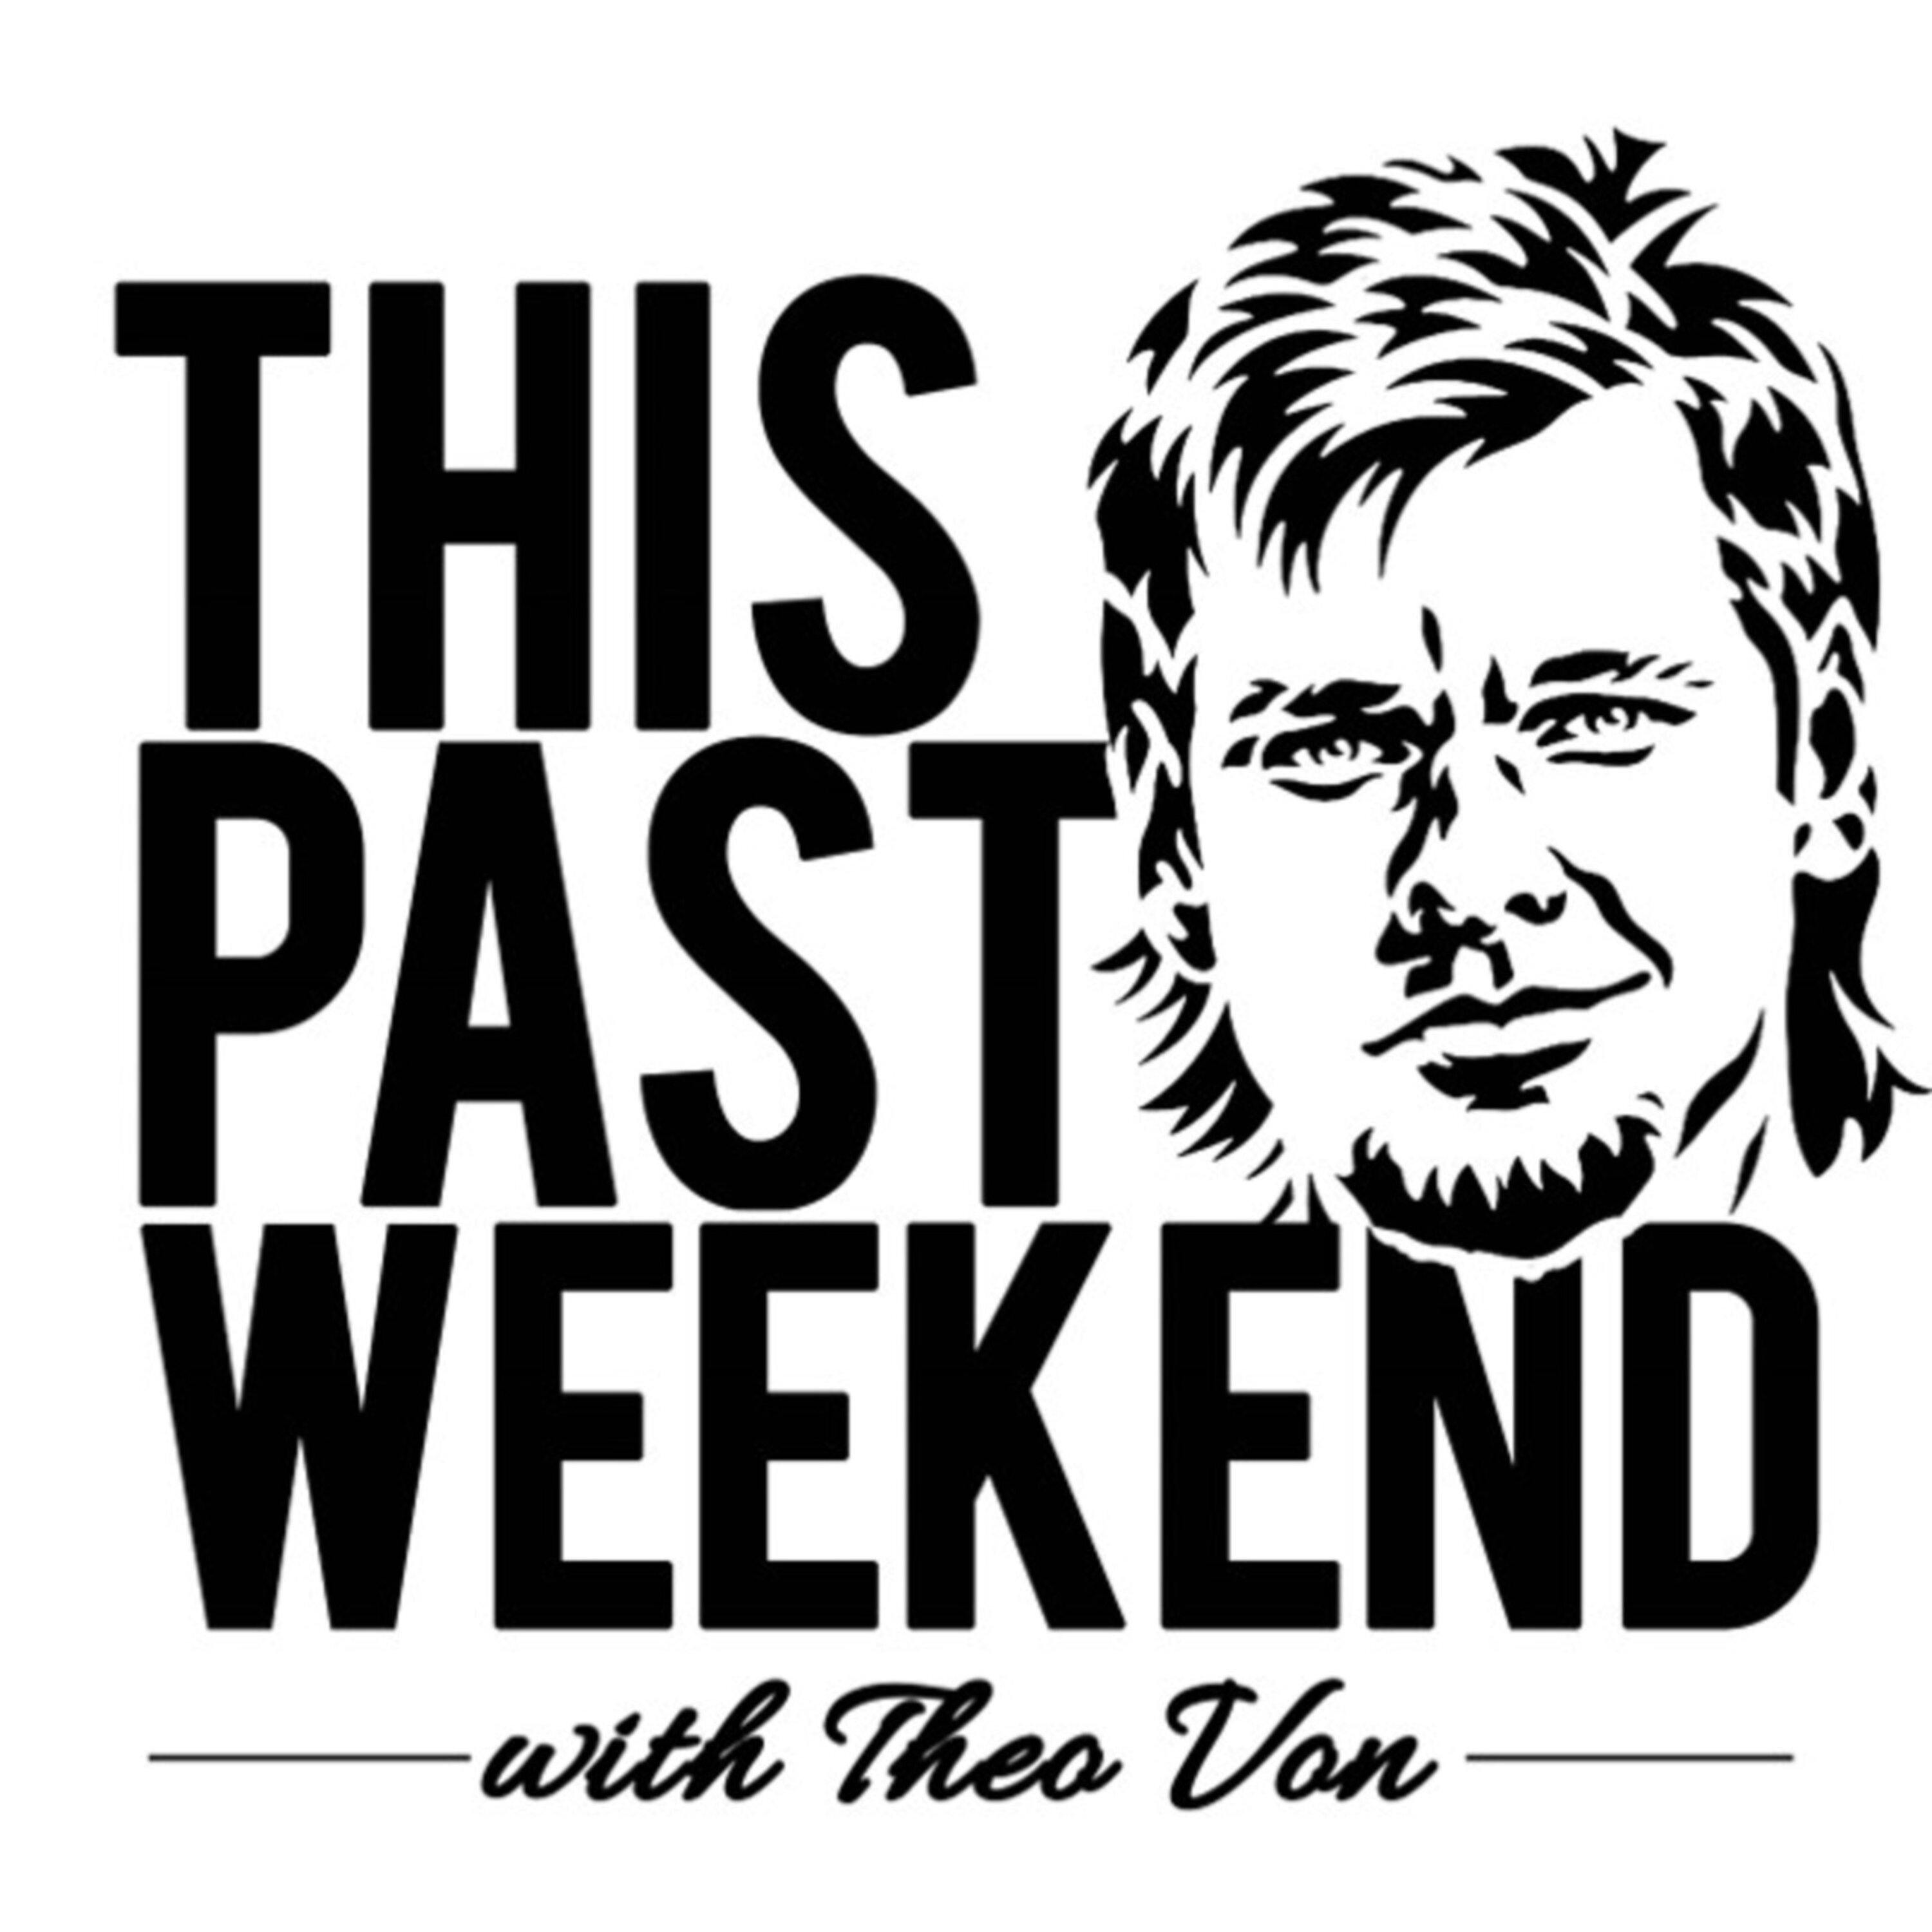 Perth Path | This Past Weekend #201 by Theo Von